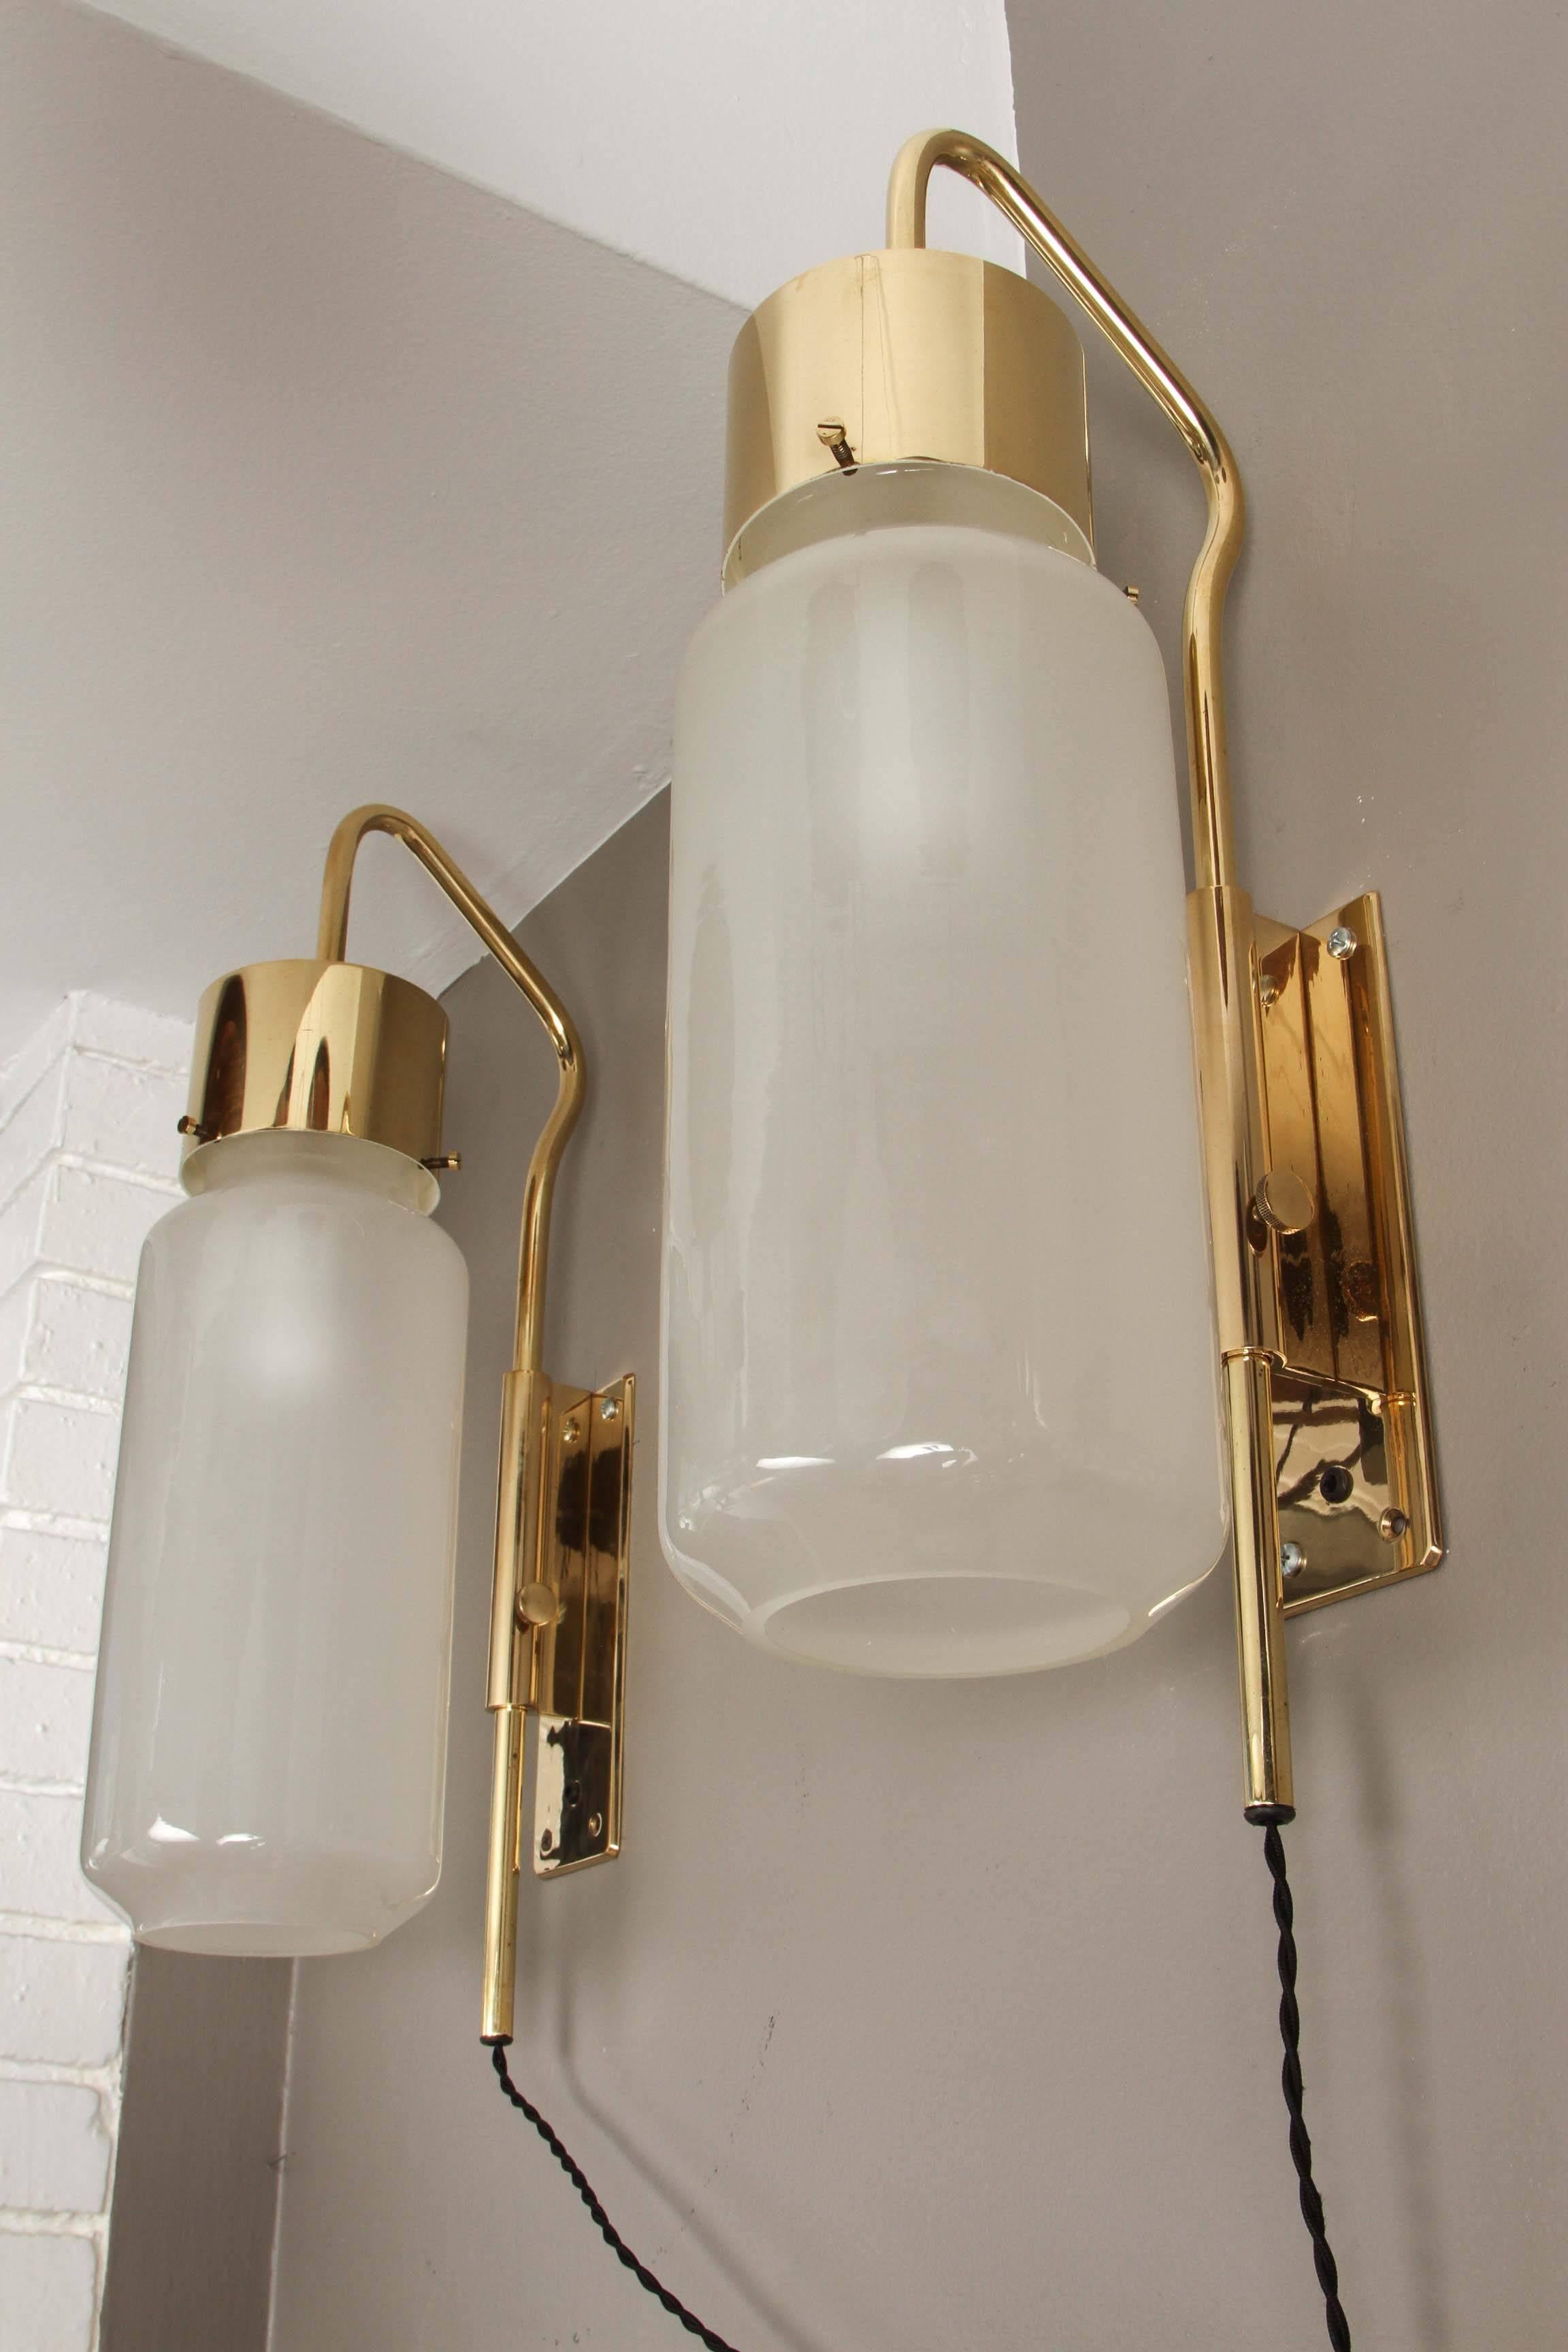 1950s Luigi Caccia Dominioni 'LP 10' wall light for Azucena. Exceptionally rare original edition executed in architectural brass and opaline glass, Italy, circa 1958. An incredibly refined and still quite modern design by one of the great Italian